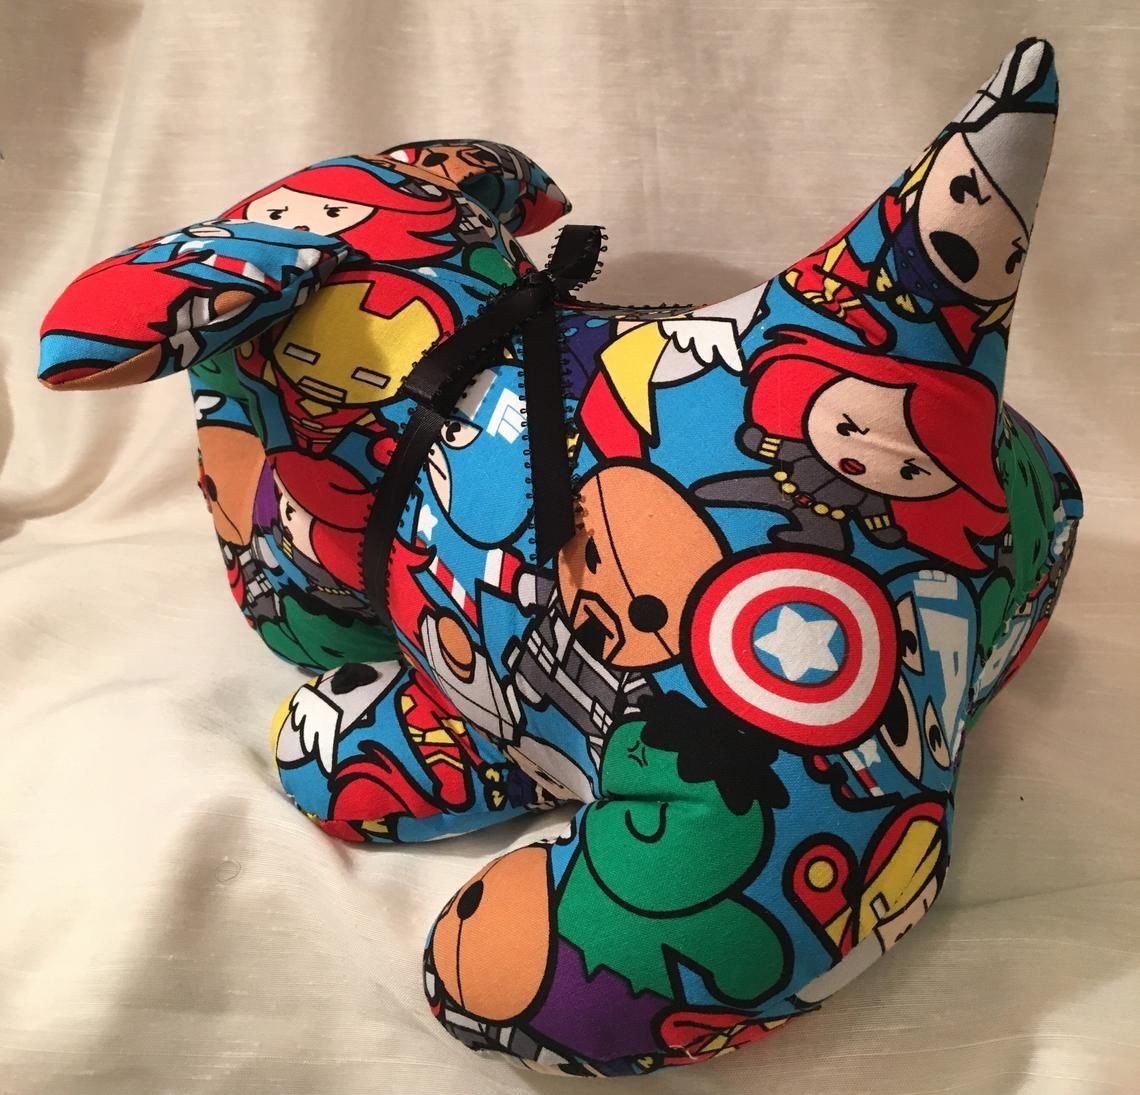 Handmade item, Super puppy,handmade stuffed animal, a dog lovers gift, great for kids of all ages, fun pillow, a soft sculpture, unique gift -   22 fabric crafts Homemade christmas gifts
 ideas